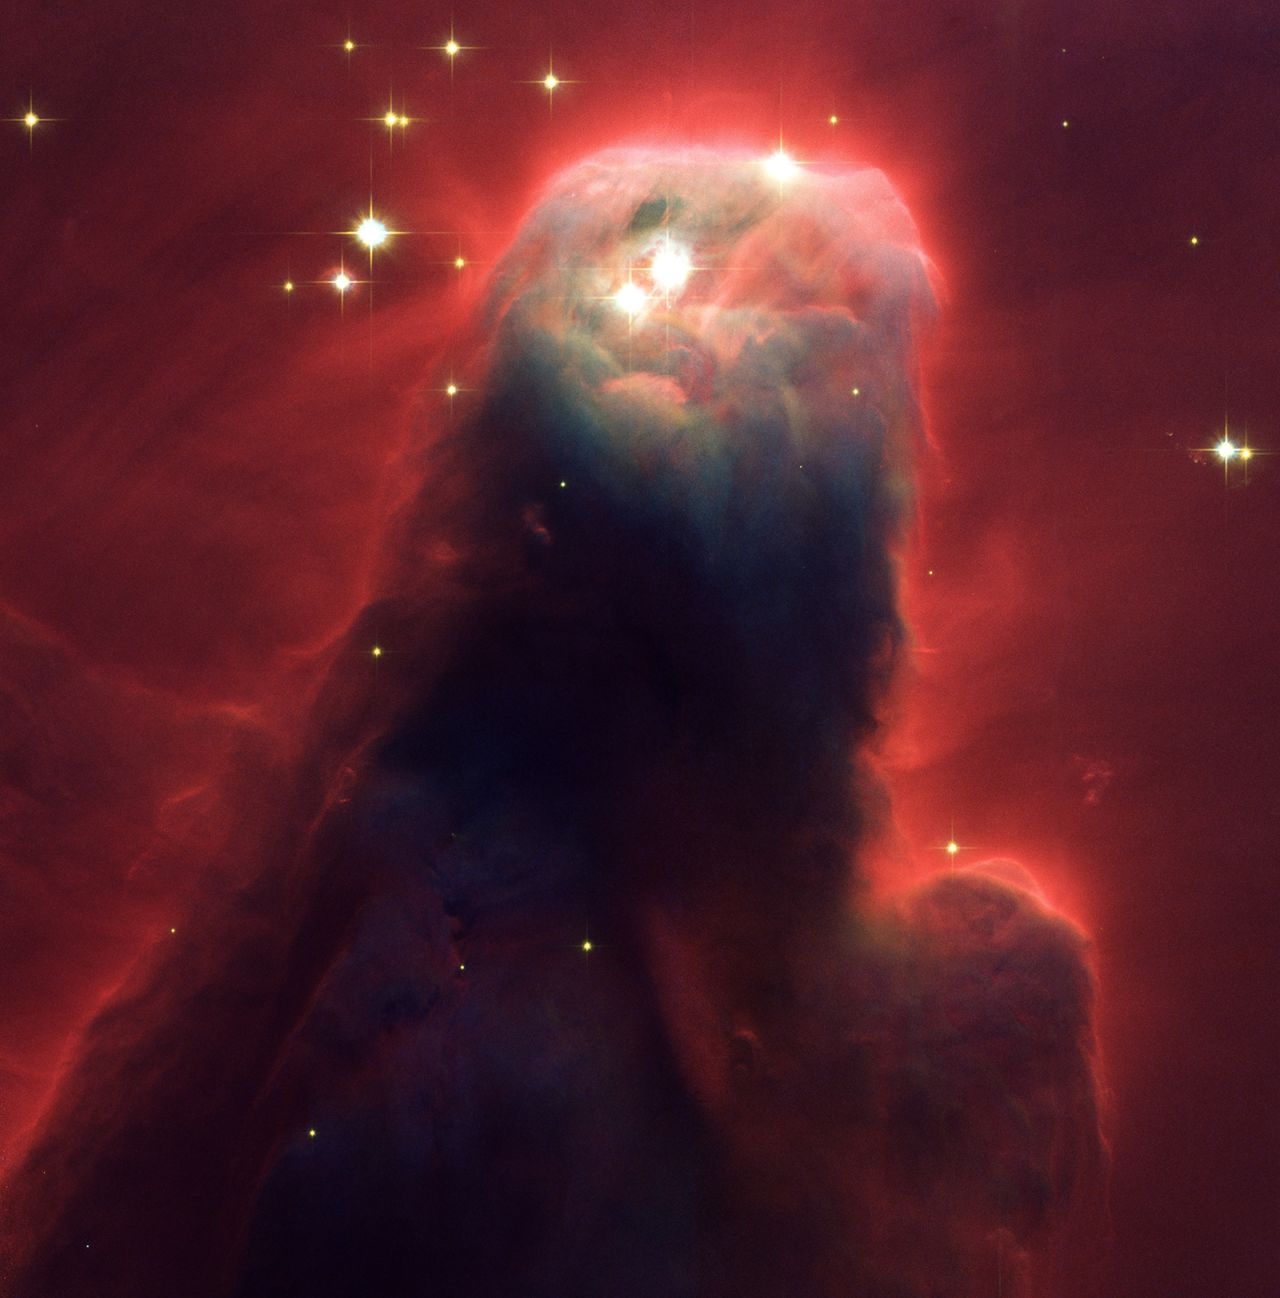 The Cone Nebula is a turbulent star-forming pillar of gas and dust. It's 7 light-years long, but this image taken by Hubble in 2002 shows the top 2.5 light-years (which equals 23 million round trips to the moon). Ultraviolet radiation causes the hydrogen gas to emit an eerie red glow.